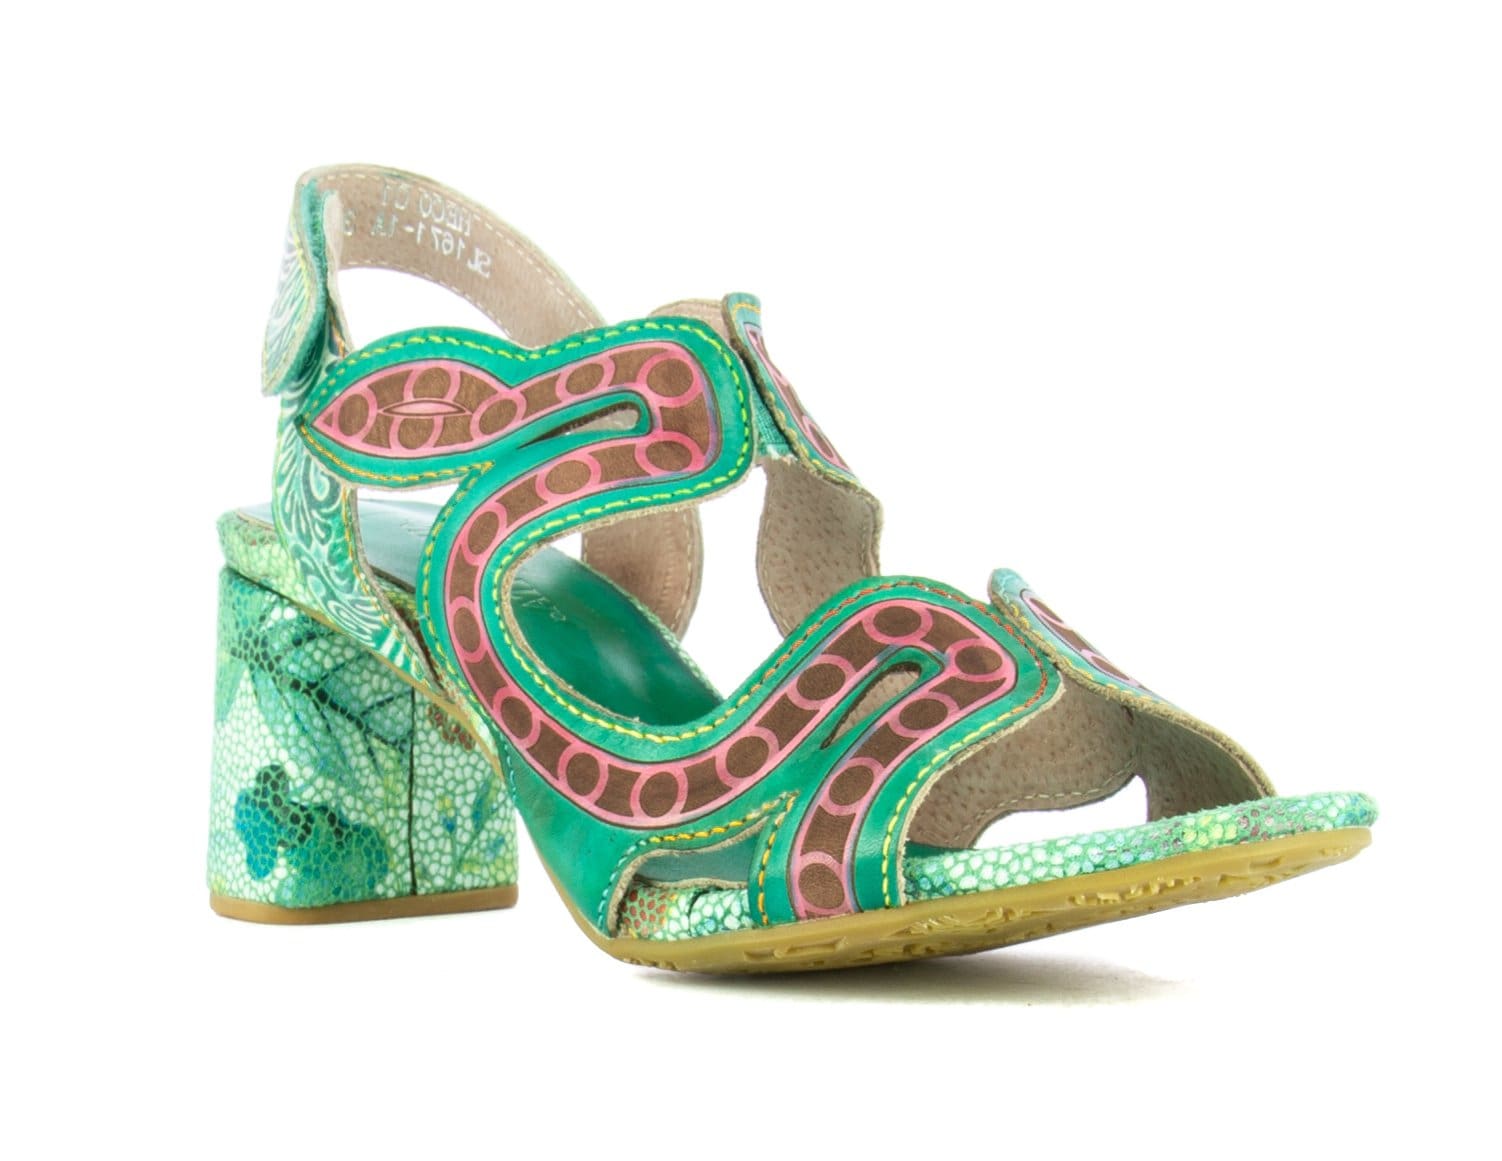 HECO 01 Shoes - Sandal